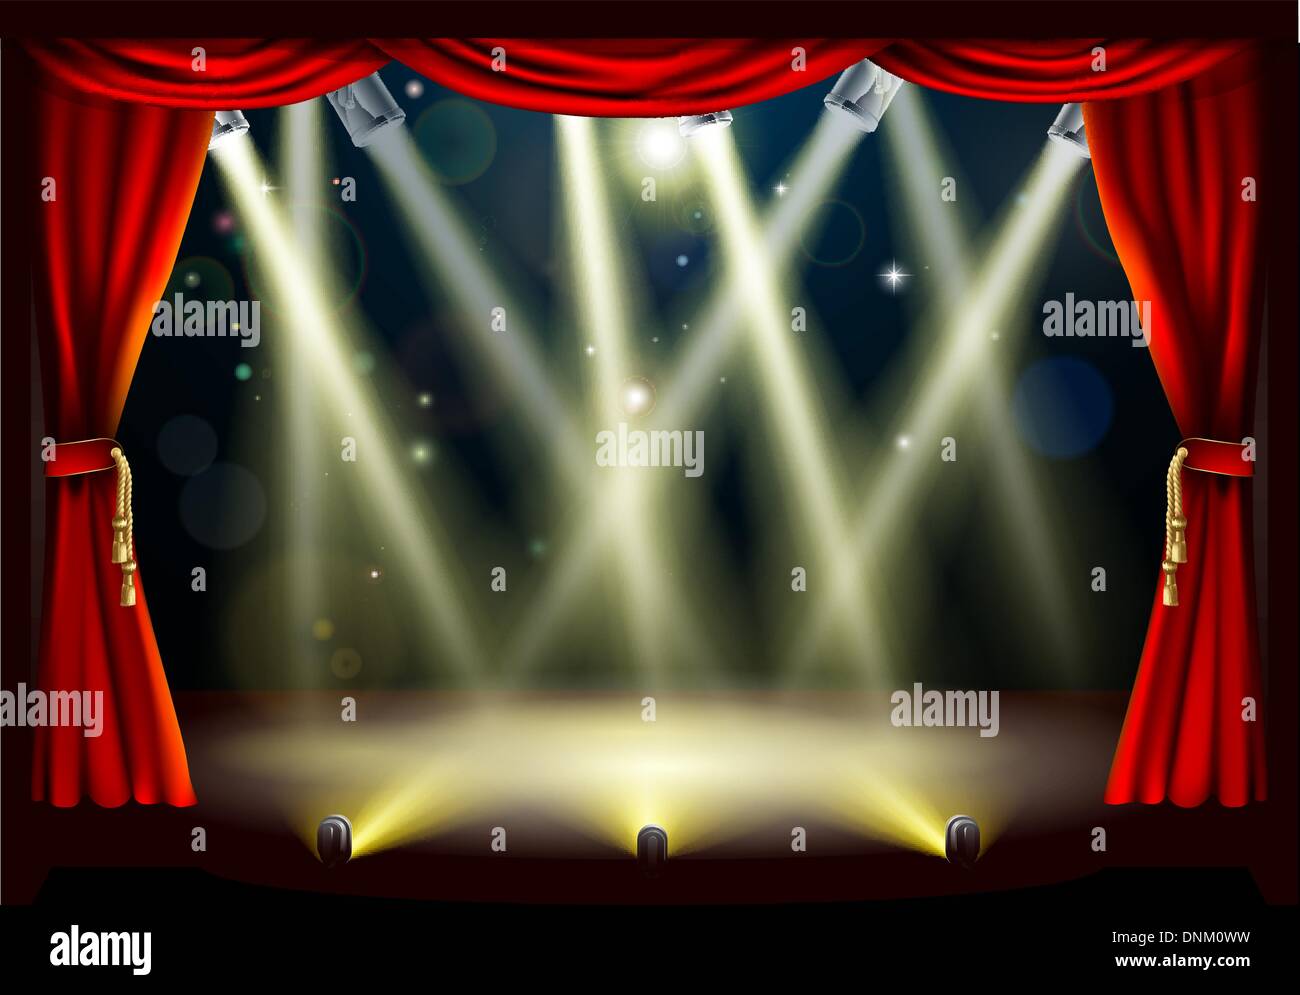 Illustration of a theater stage with lots of stage lights or spotlights with footlights Stock Vector